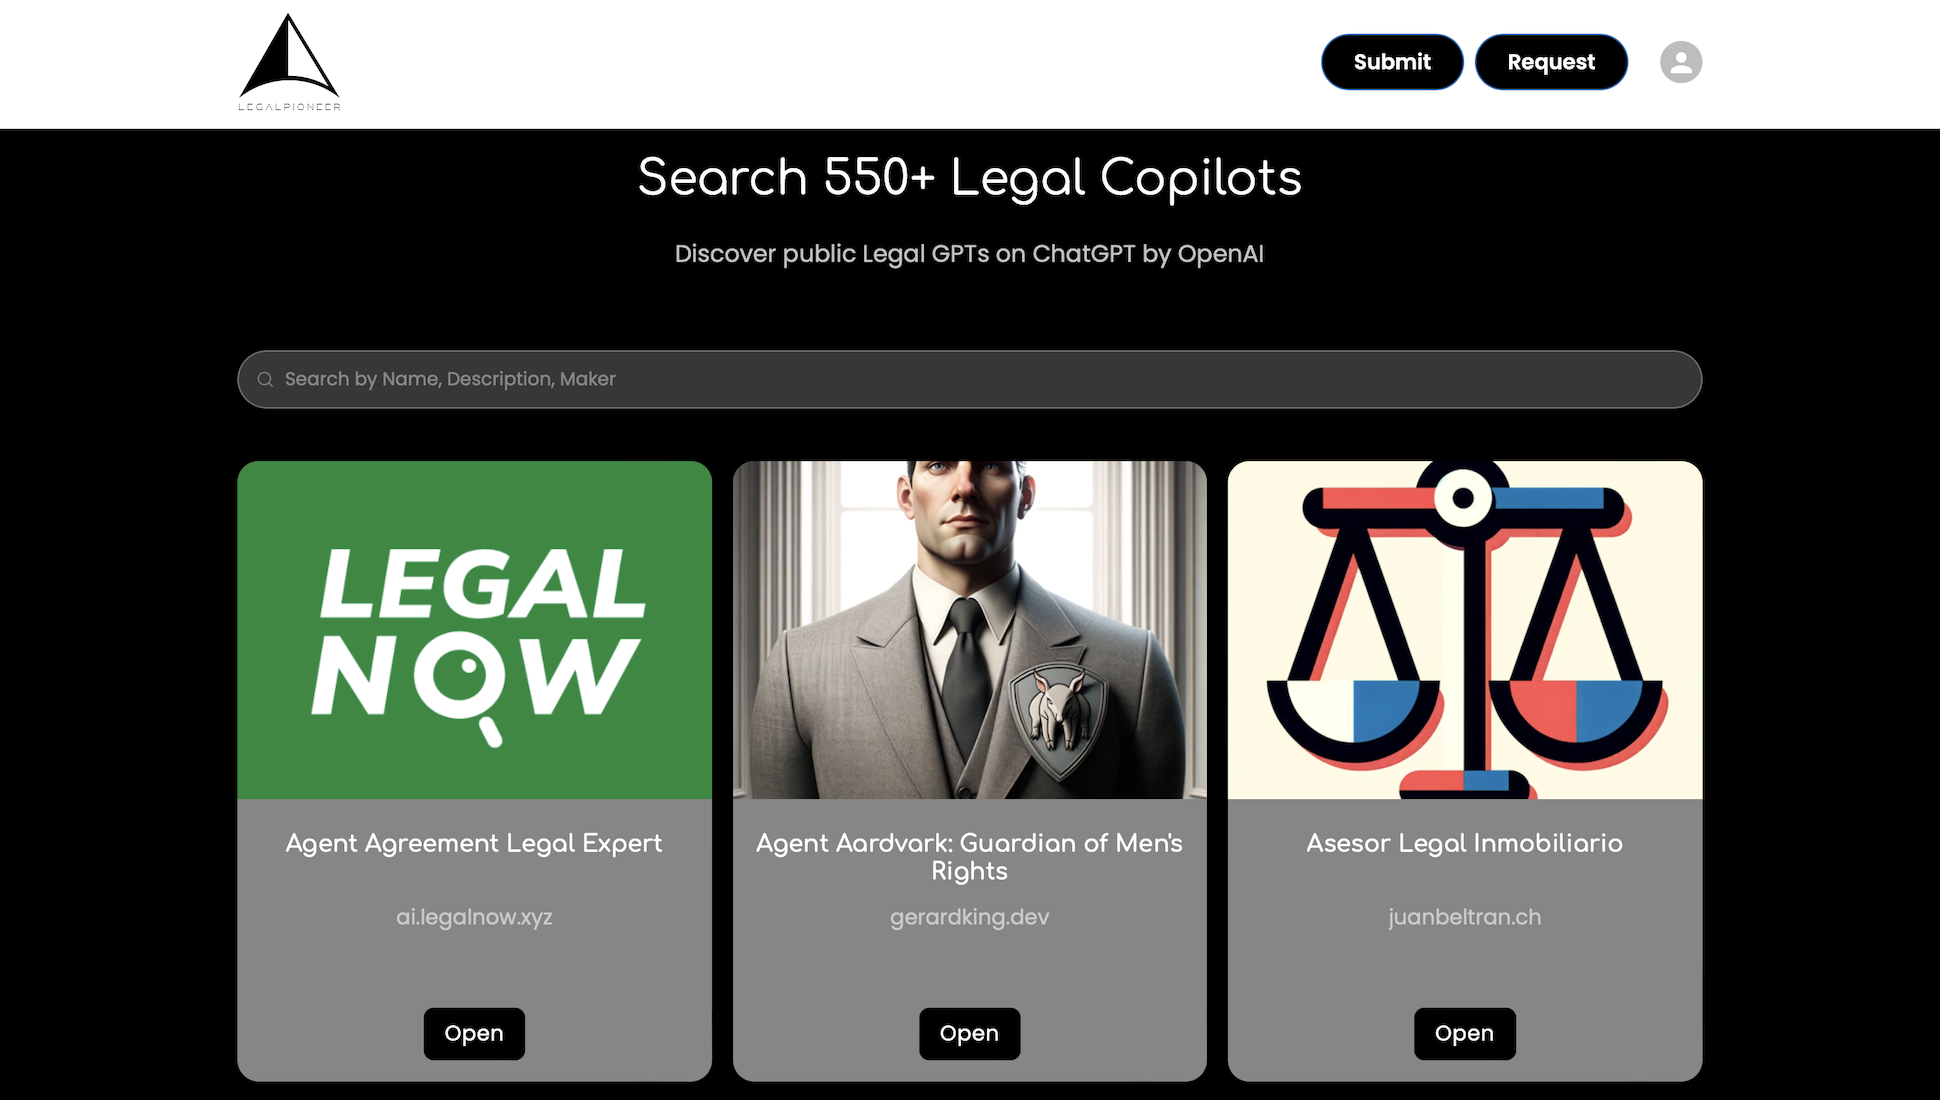 New Resource Catalogs and Makes Searchable Nearly 600 GPTs Related to Law, Tax and Regulatory Issues